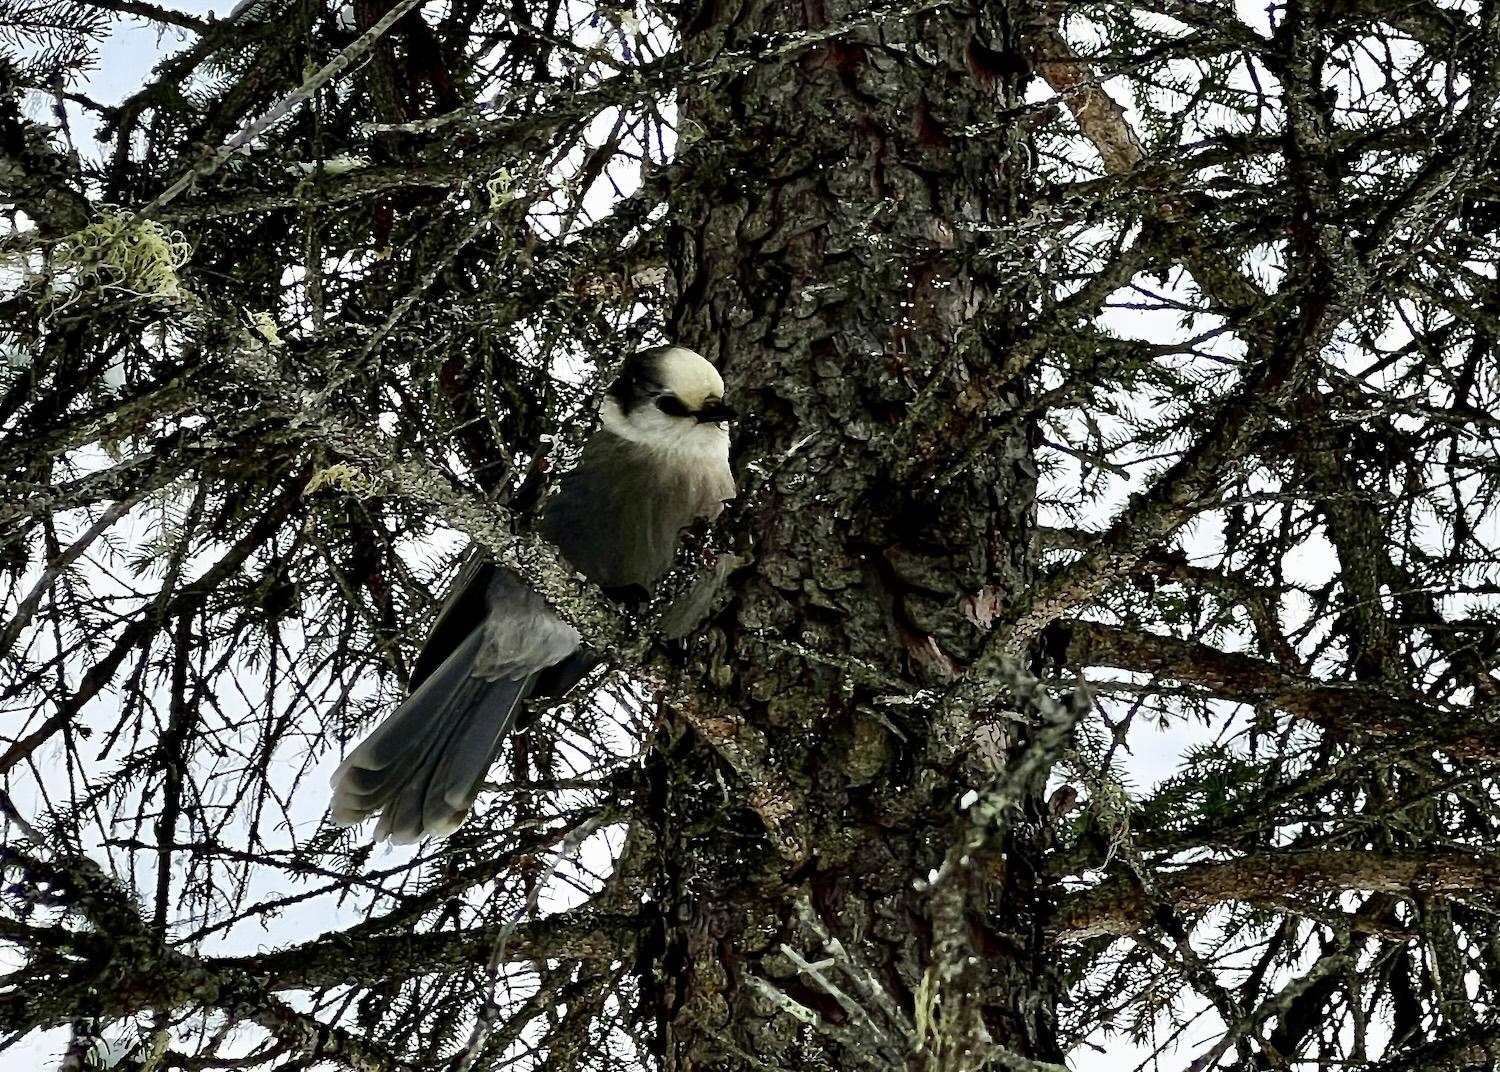 This Canada Jay was spotted on the trail around Emerald Lake in Yoho National Park.